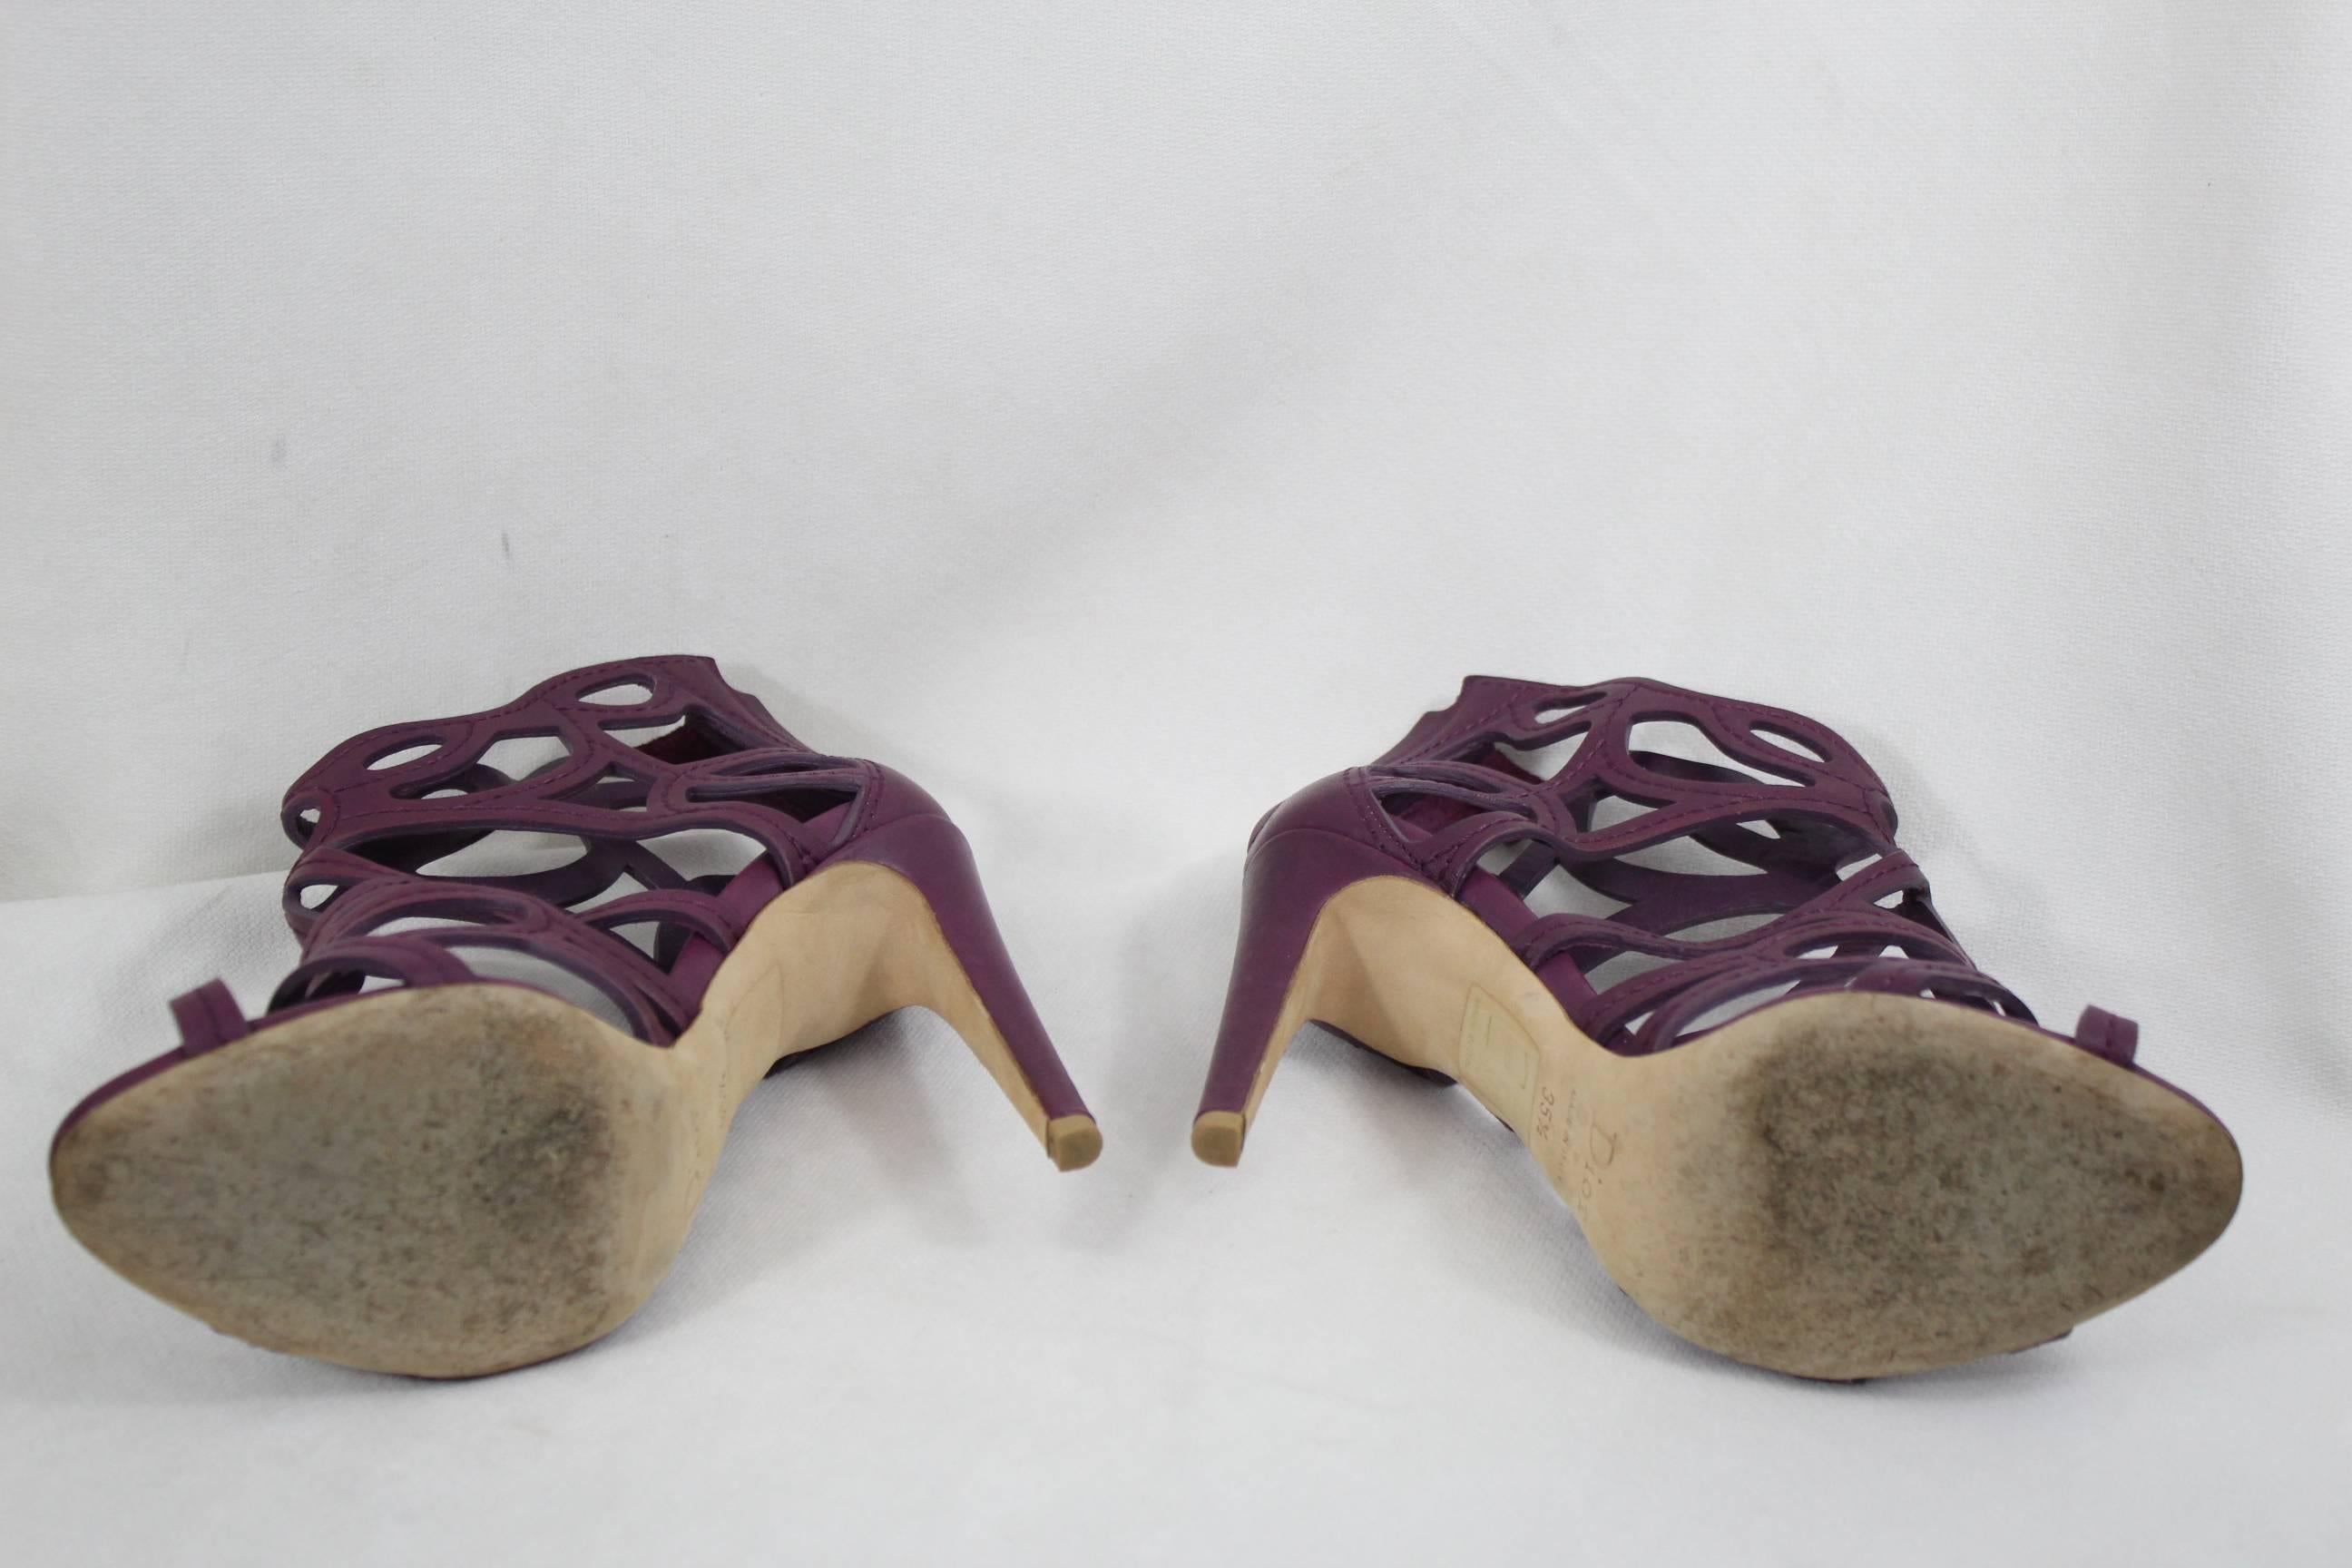 Really nice sandals from Christian Dior in purple leather. They are mor ebeautiful than in the photos.

Good condition, just some sign of use in the sole.